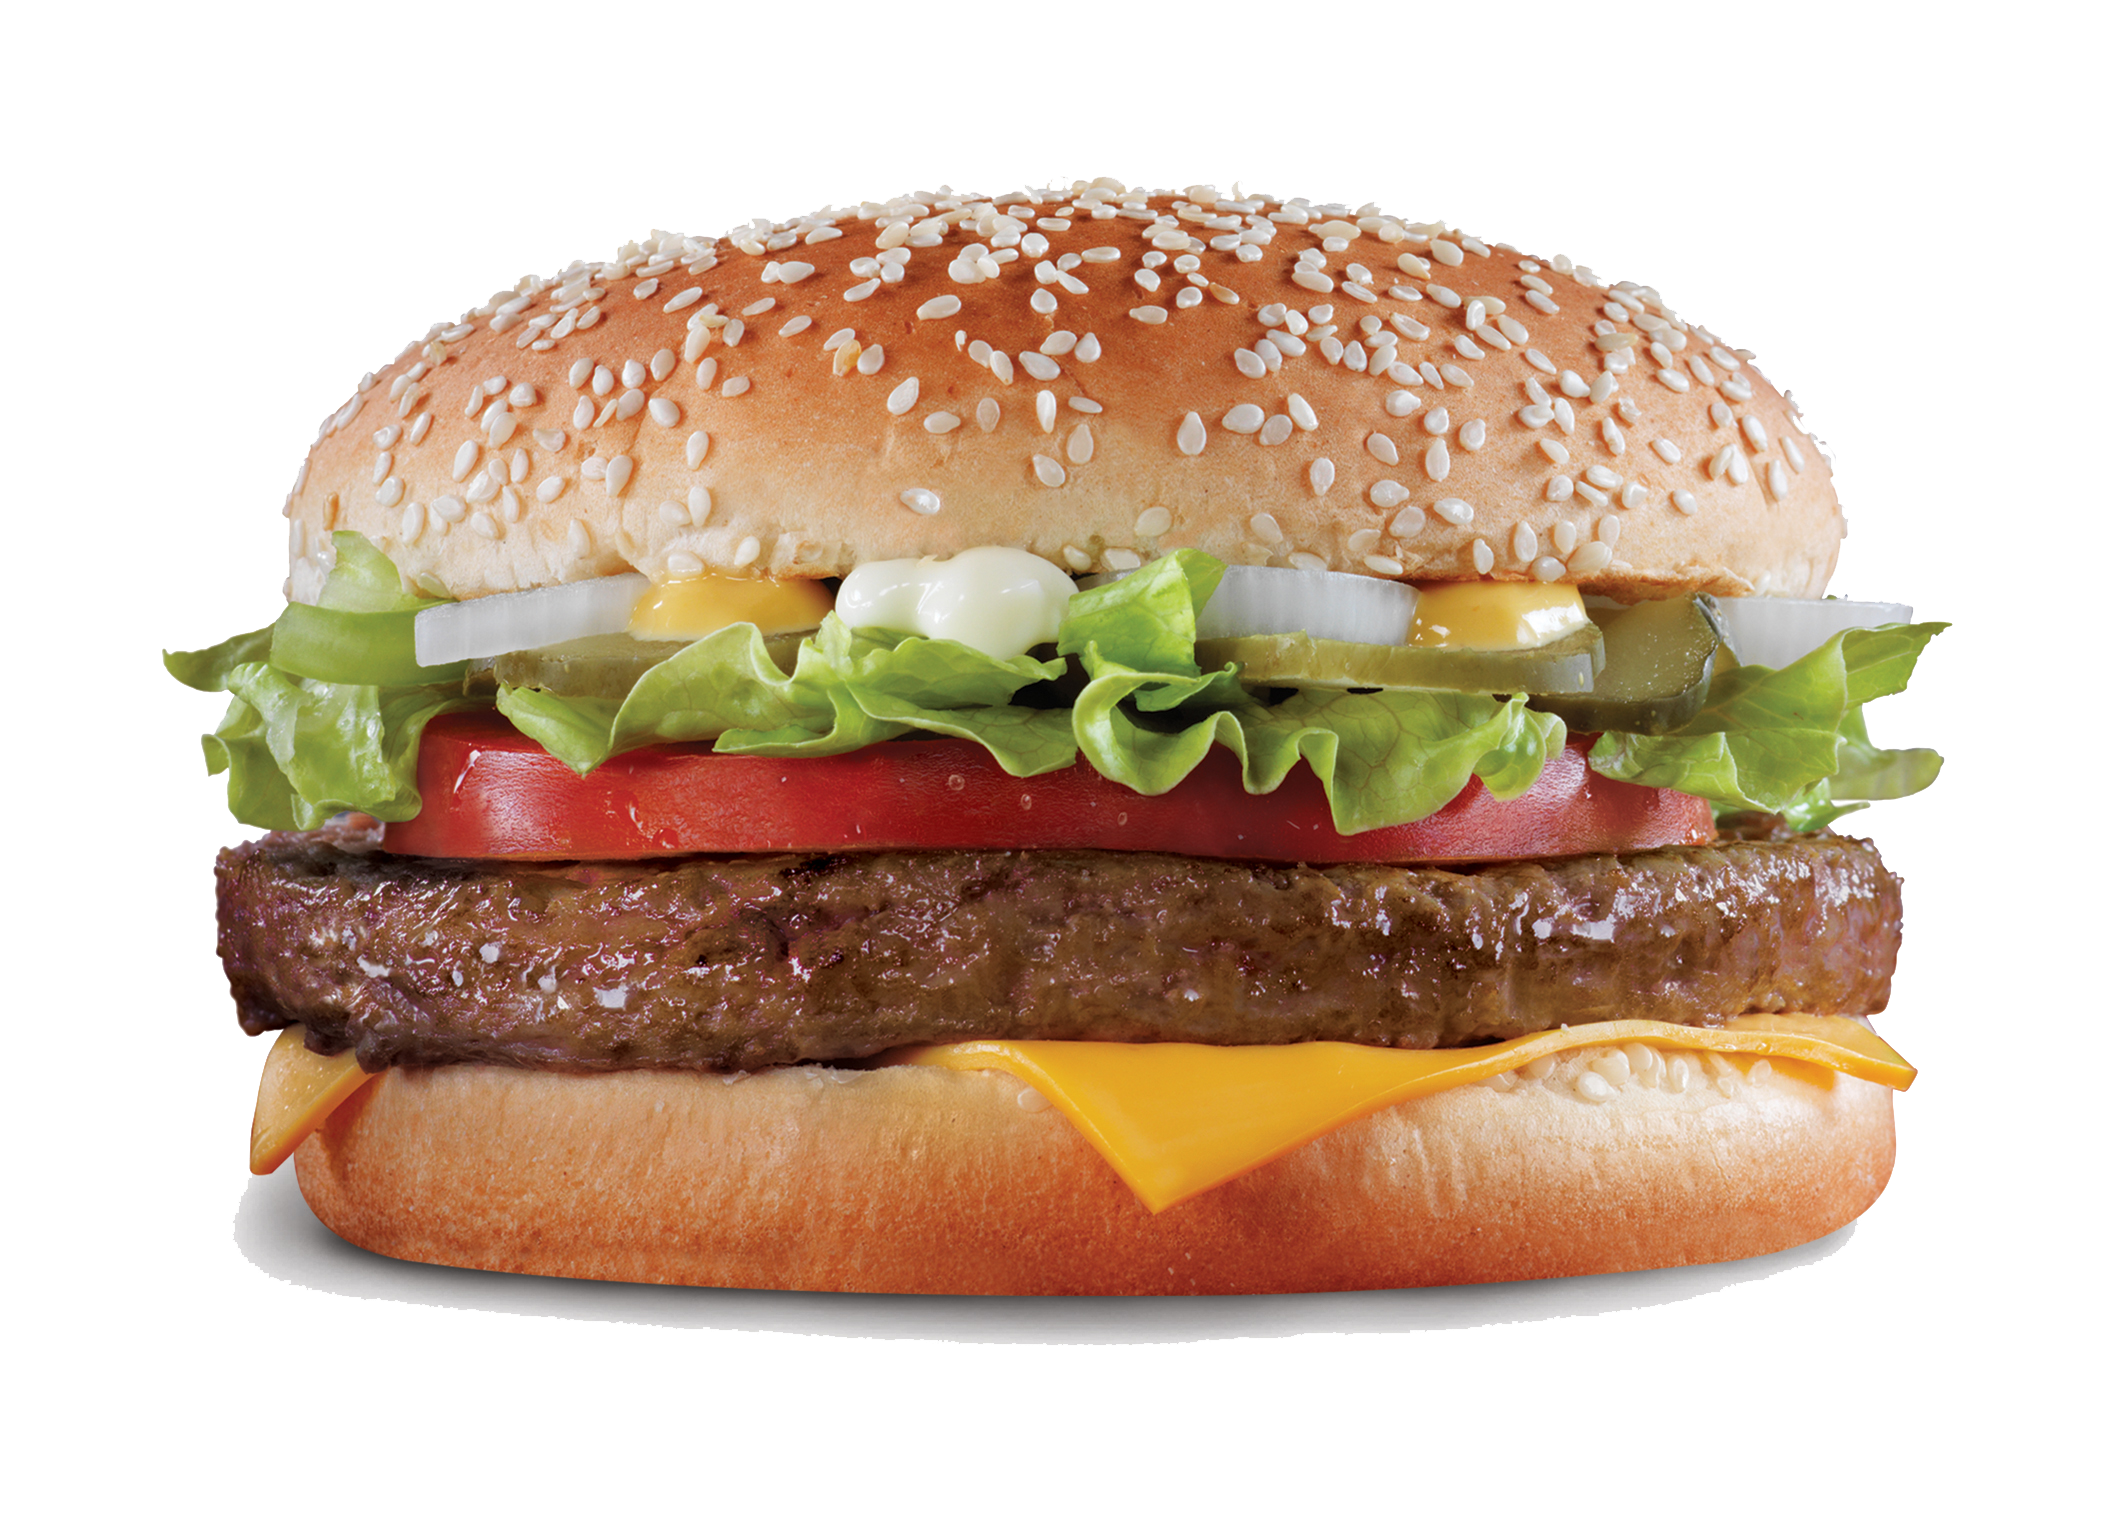 transparent background with burgers